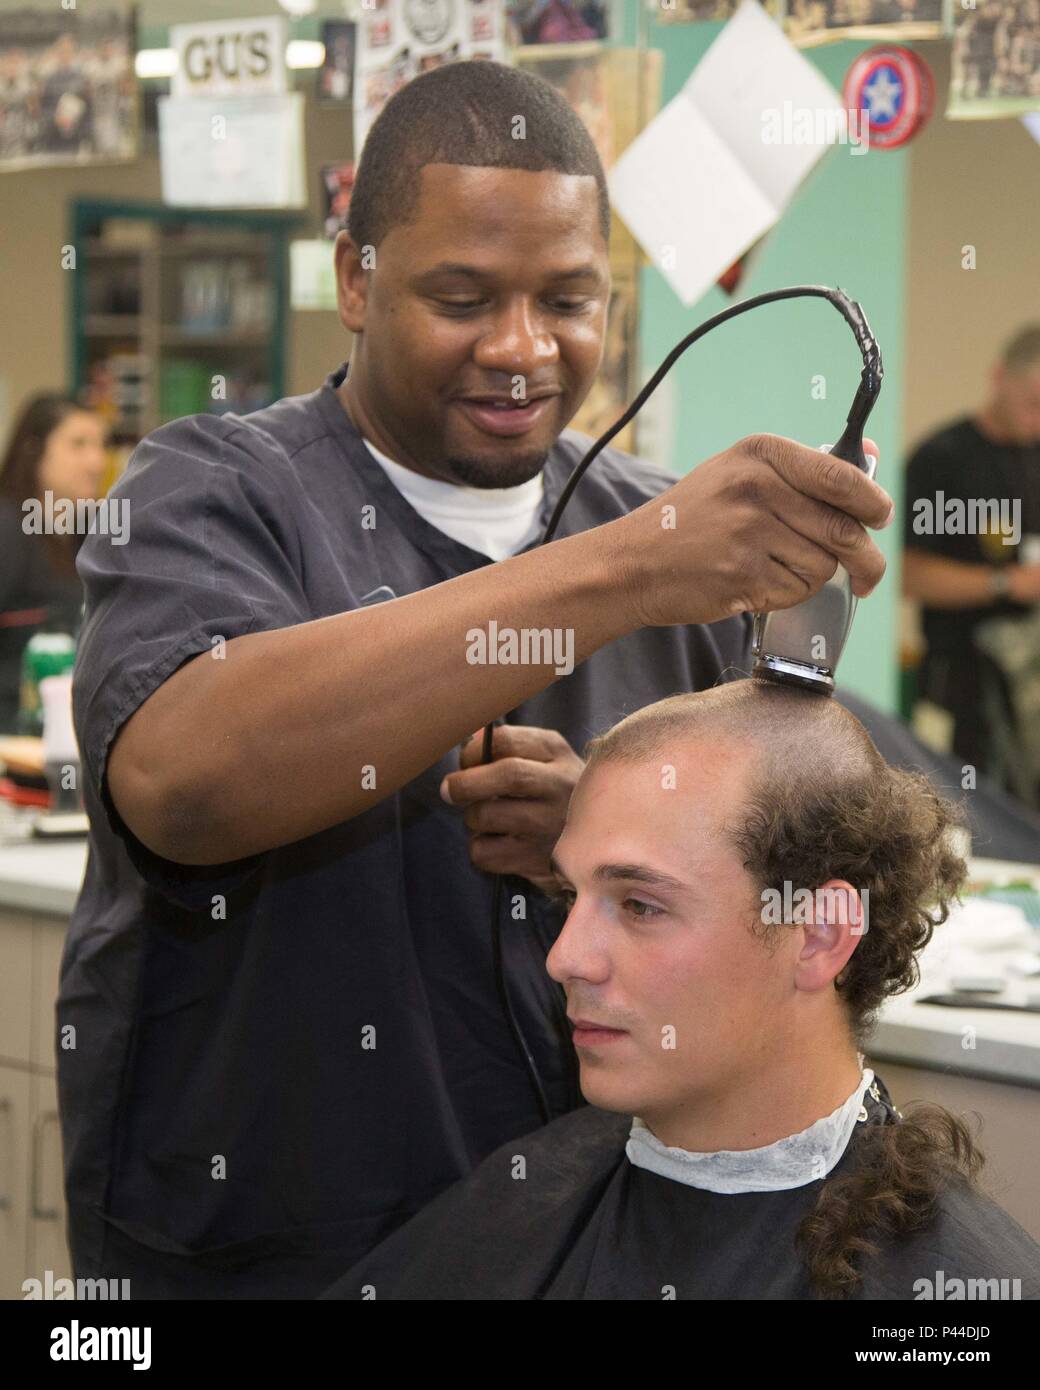 Page 2 Military Haircut High Resolution Stock Photography And Images Alamy